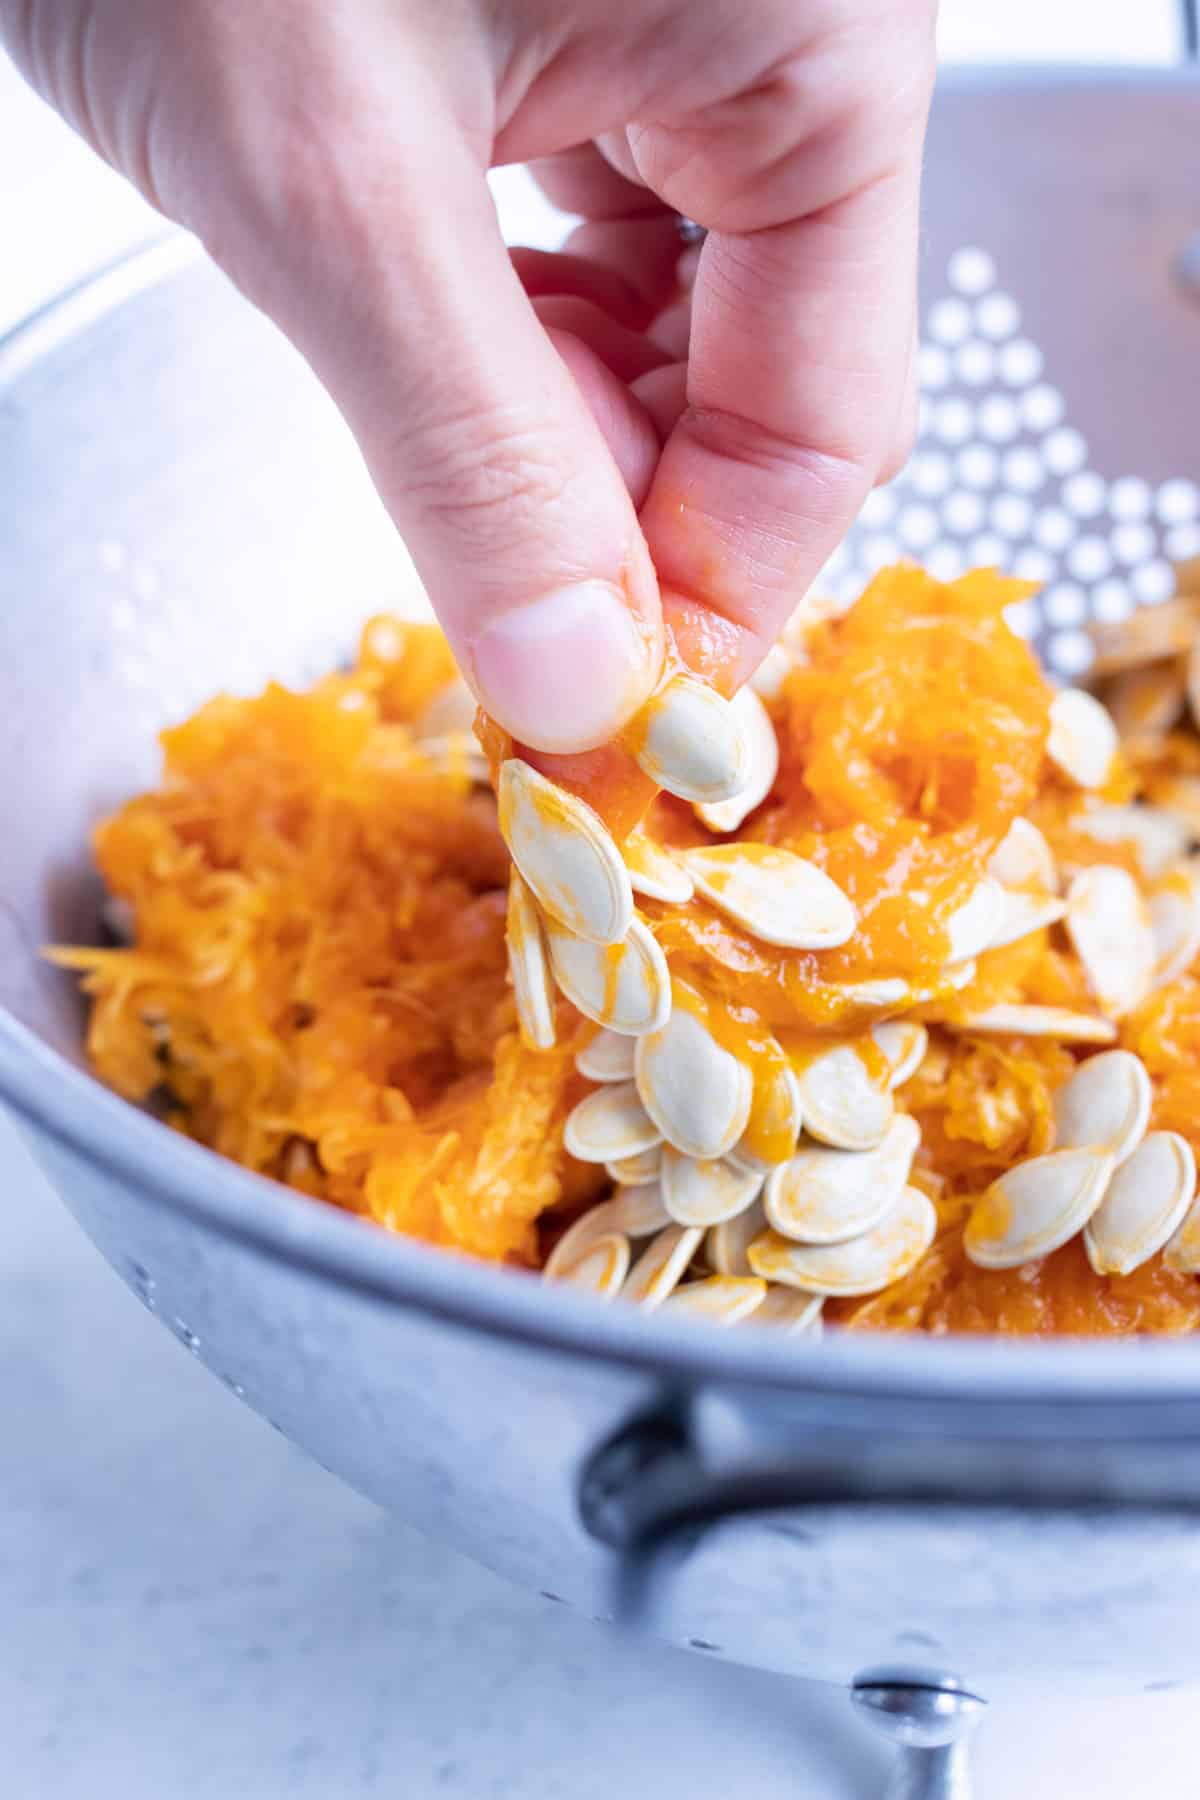 Pumpkin seeds are separated from pumpkin flesh and cleaned in a strainer.